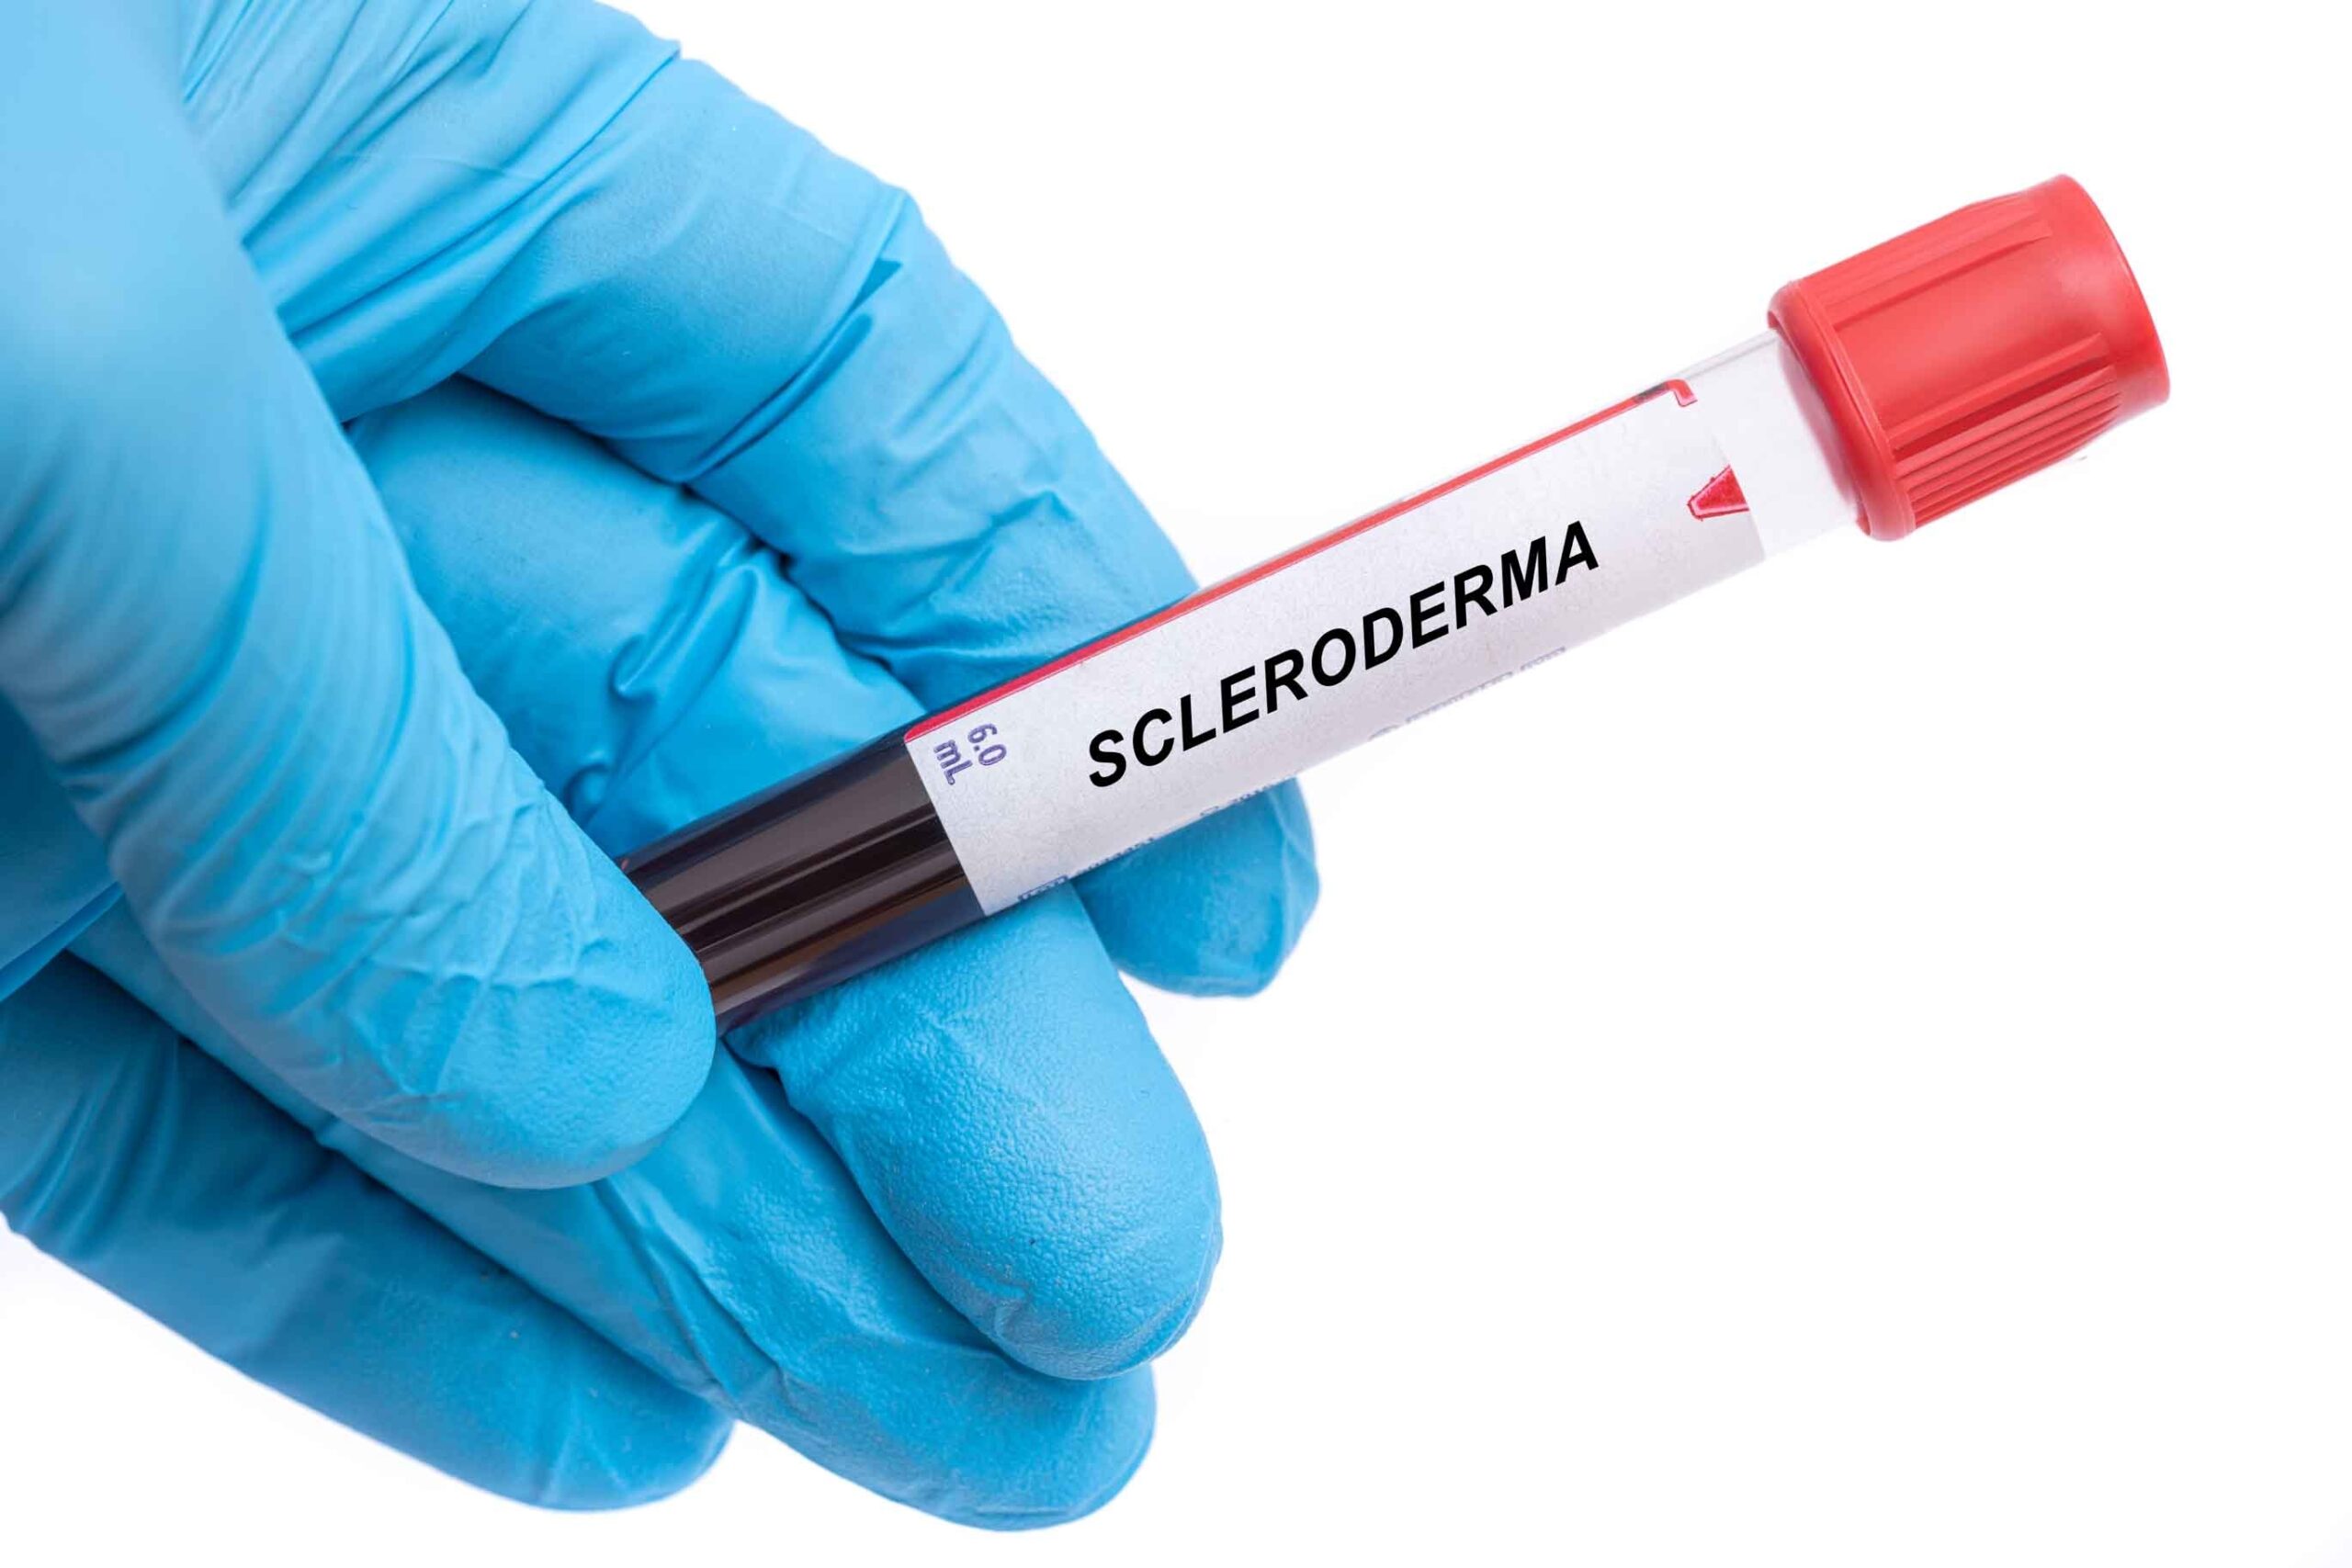 Scleroderma: What Is, Types, Causes, Symptoms, and Diagnosis